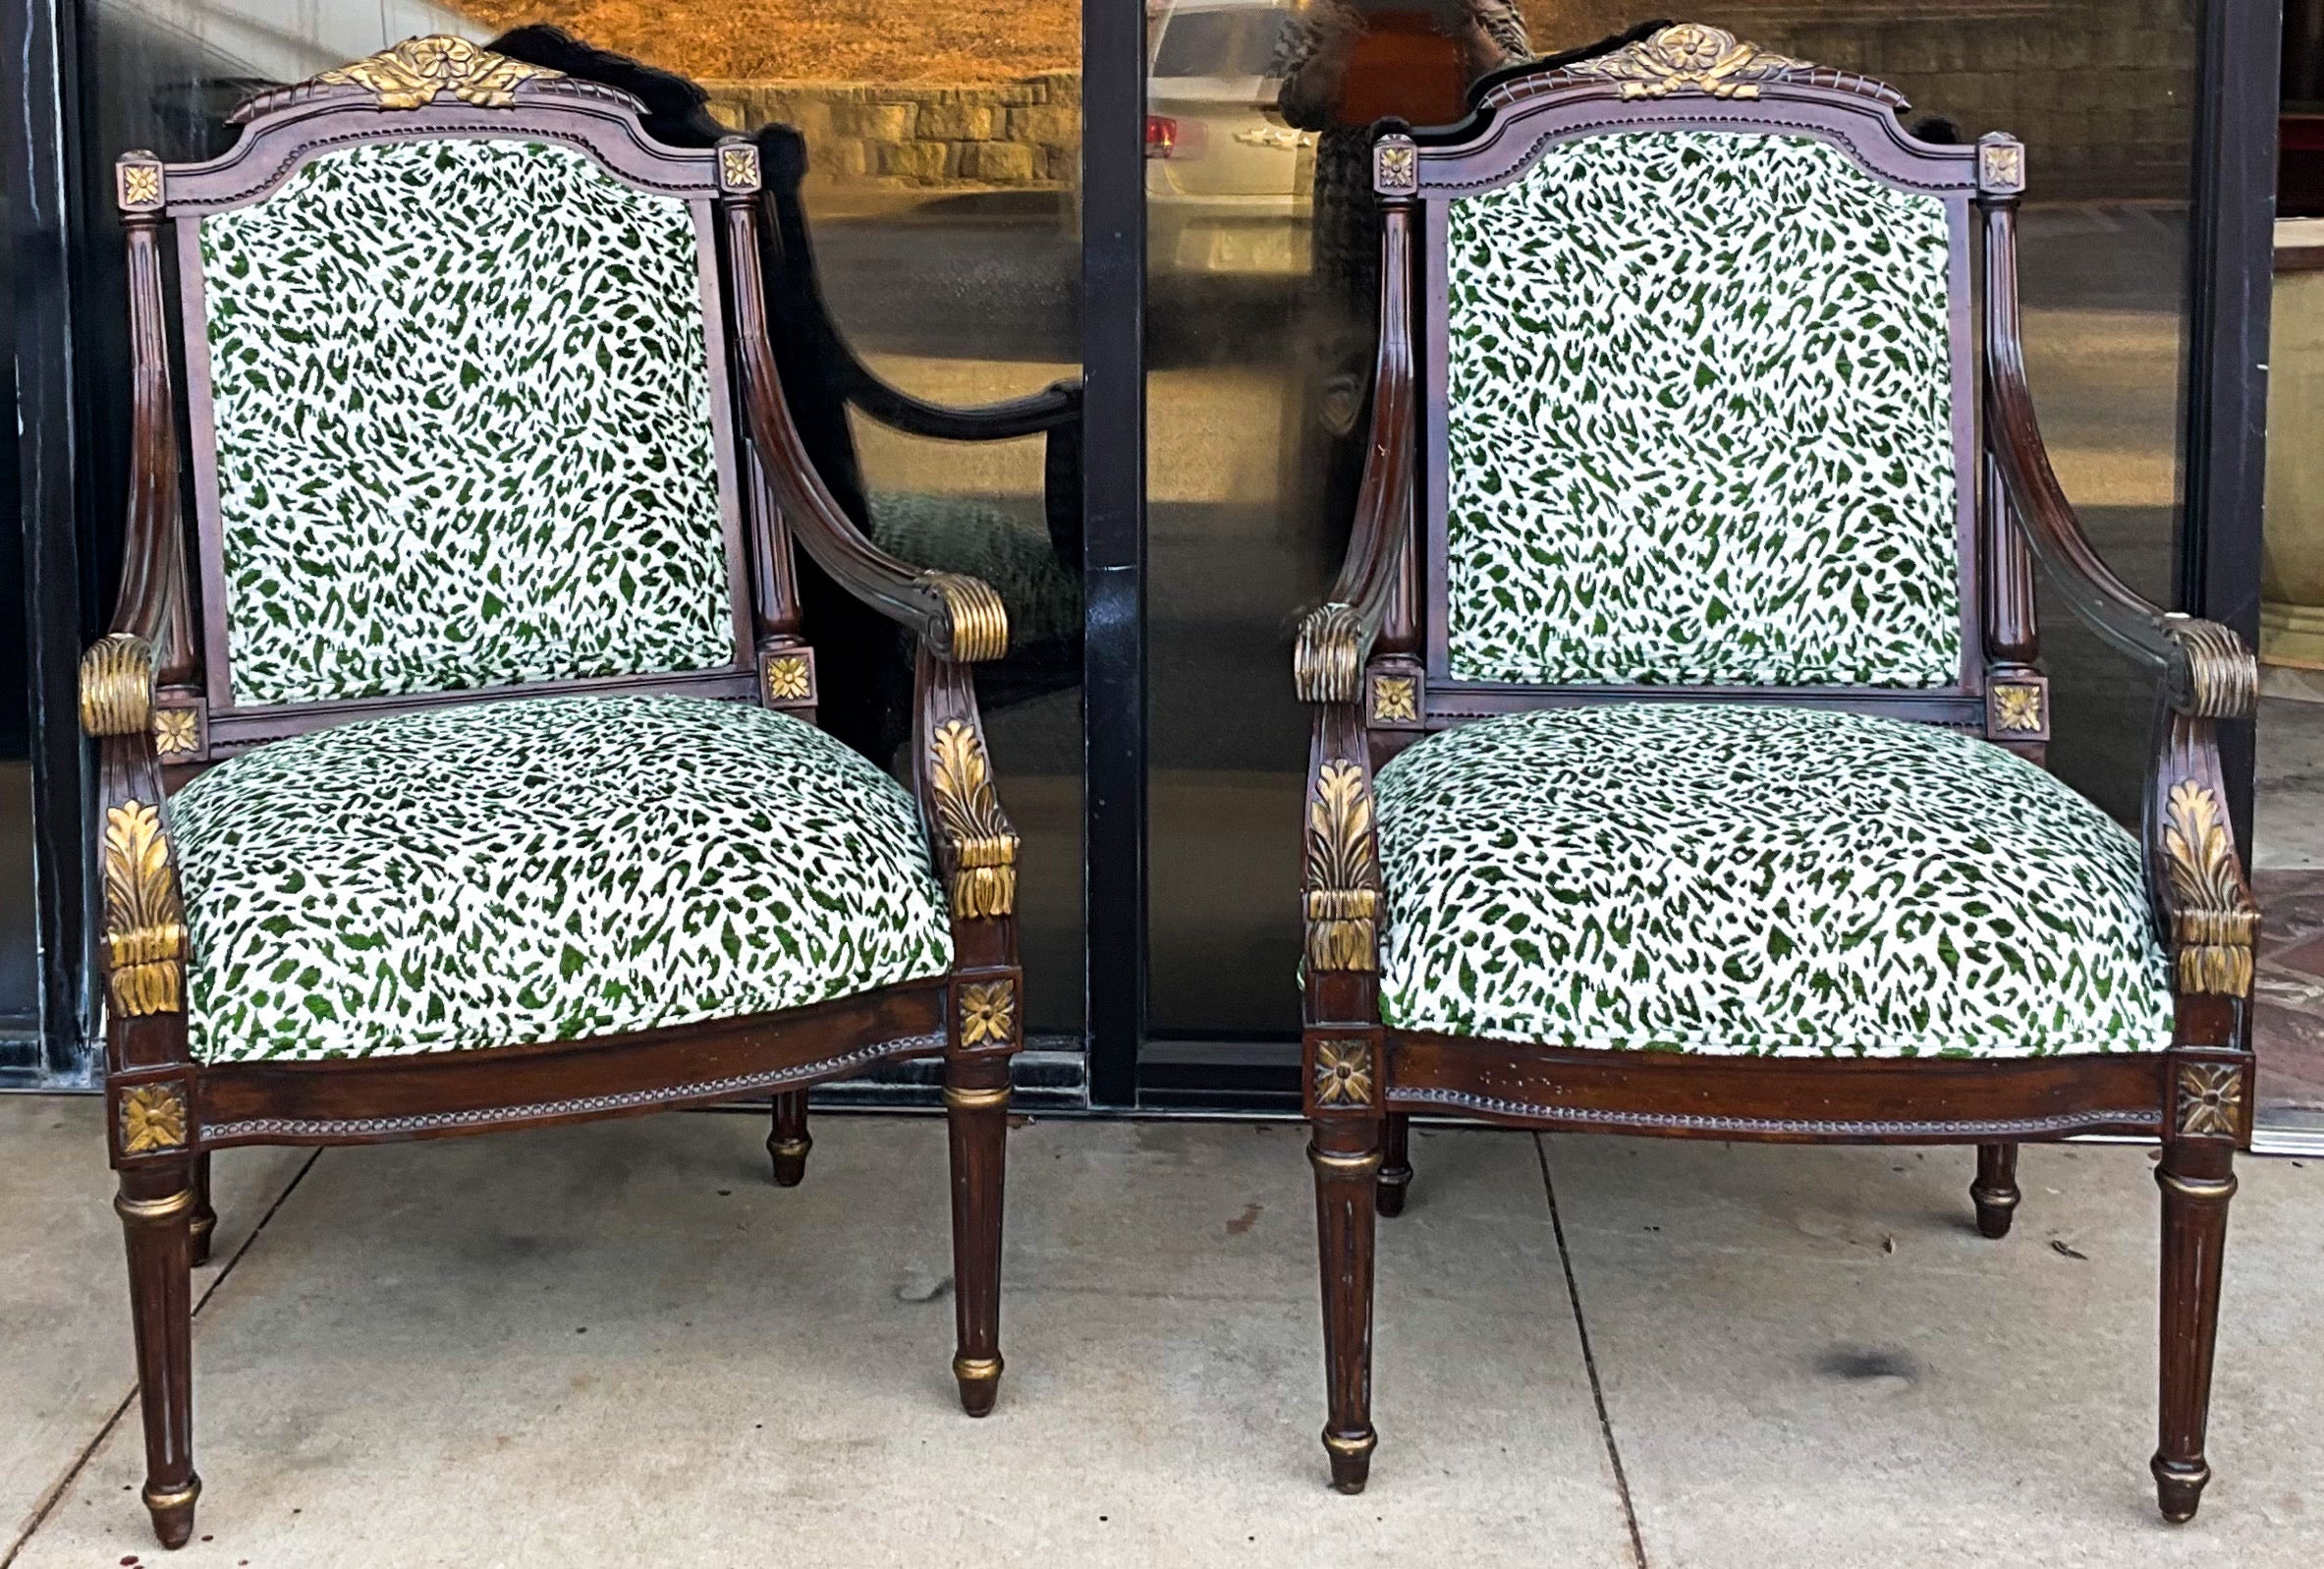 20th Century French Louis XVI Style Mahogany & Giltwood Bergere Chairs In Green Velvet - Pair For Sale